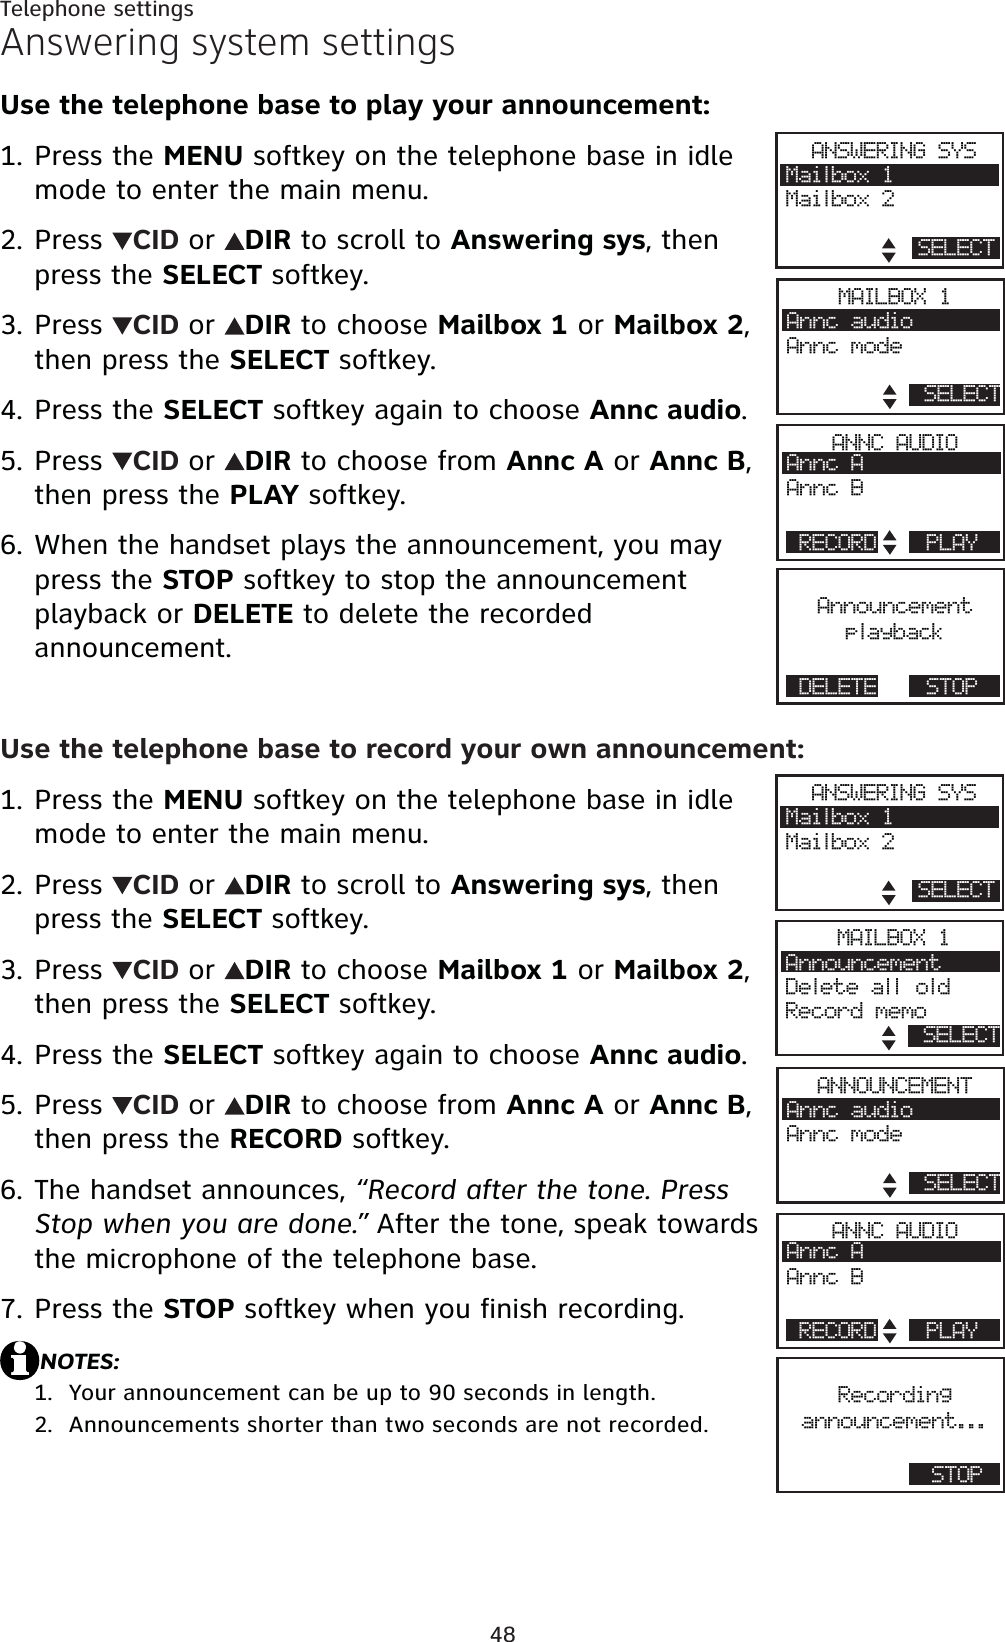 48Telephone settingsAnswering system settingsUse the telephone base to play your announcement:Press the MENU softkey on the telephone base in idle mode to enter the main menu.Press  CID or DIR to scroll to Answering sys, then press the SELECT softkey.Press  CID or DIR to choose Mailbox 1 or Mailbox 2,then press the SELECT softkey.Press the SELECT softkey again to choose Annc audio.Press  CID or DIR to choose from Annc A or Annc B,then press the PLAY softkey.When the handset plays the announcement, you may press the STOP softkey to stop the announcement playback or DELETE to delete the recorded announcement.Use the telephone base to record your own announcement:Press the MENU softkey on the telephone base in idle mode to enter the main menu.Press  CID or DIR to scroll to Answering sys, then press the SELECT softkey.Press  CID or DIR to choose Mailbox 1 or Mailbox 2,then press the SELECT softkey.Press the SELECT softkey again to choose Annc audio.Press  CID or DIR to choose from Annc A or Annc B,then press the RECORD softkey.The handset announces, “Record after the tone. Press Stop when you are done.” After the tone, speak towards the microphone of the telephone base.Press the STOP softkey when you finish recording.NOTES:Your announcement can be up to 90 seconds in length.Announcements shorter than two seconds are not recorded.1.2.3.4.5.6.1.2.3.4.5.6.7.1.2.AnnouncementplaybackDELETE STOPANSWERING SYSMailbox 1Mailbox 2SELECTANNC AUDIOAnnc AAnnc BRECORD PLAYMAILBOX 1Annc audioAnnc modeSELECTRecordingannouncement...STOPANSWERING SYSMailbox 1Mailbox 2SELECTANNC AUDIOAnnc AAnnc BRECORD PLAYANNOUNCEMENTAnnc audioAnnc modeSELECTMAILBOX 1AnnouncementDelete all oldRecord memoSELECT